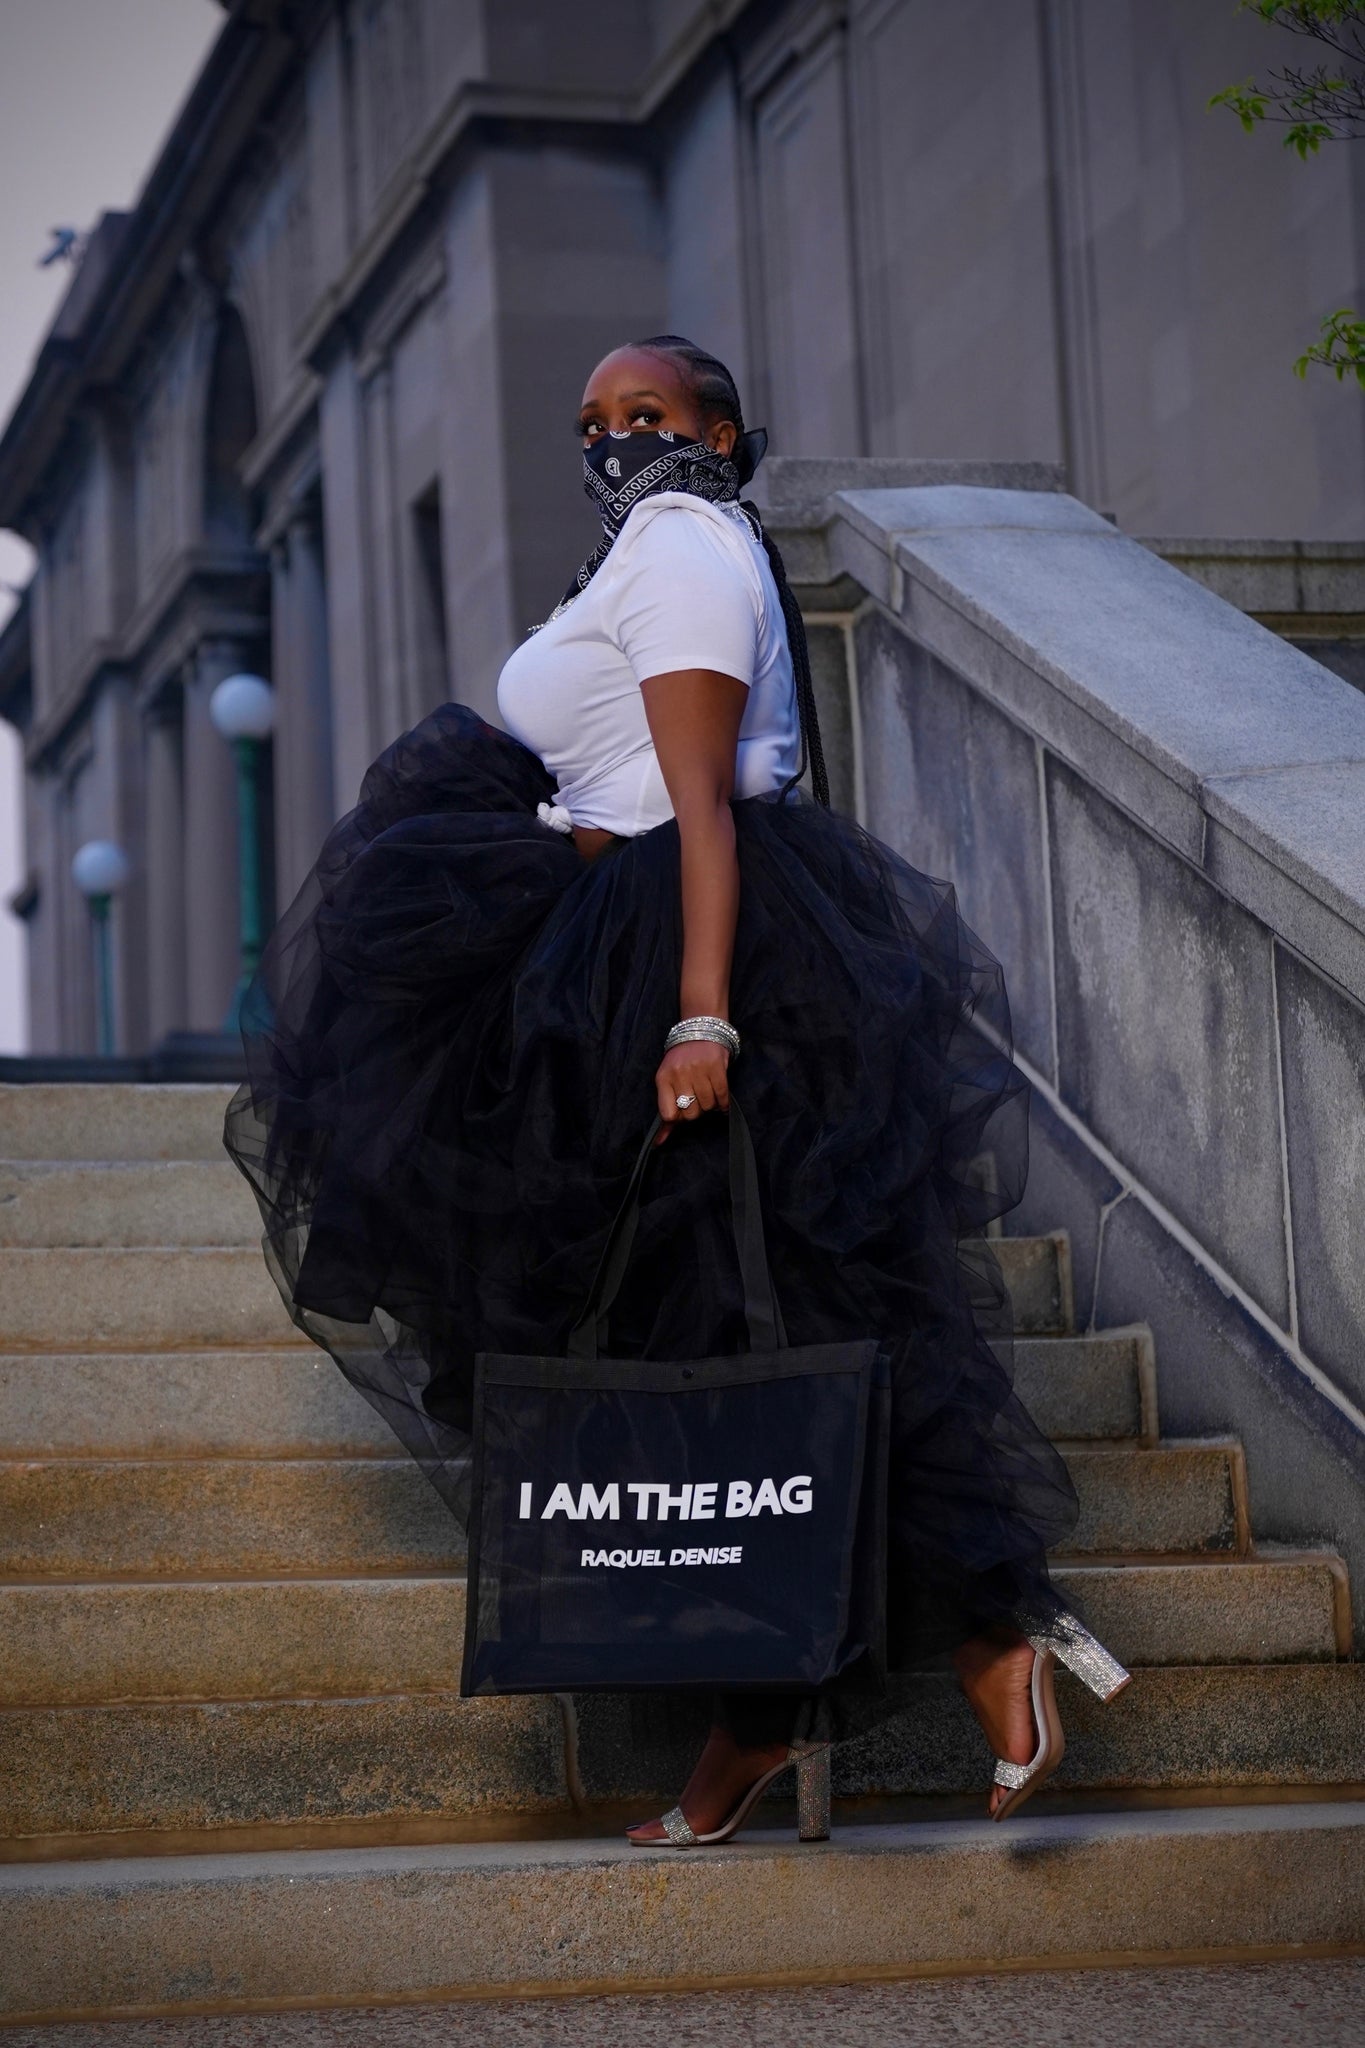 The RD “I AM THE BAG” Mesh Tote ™️